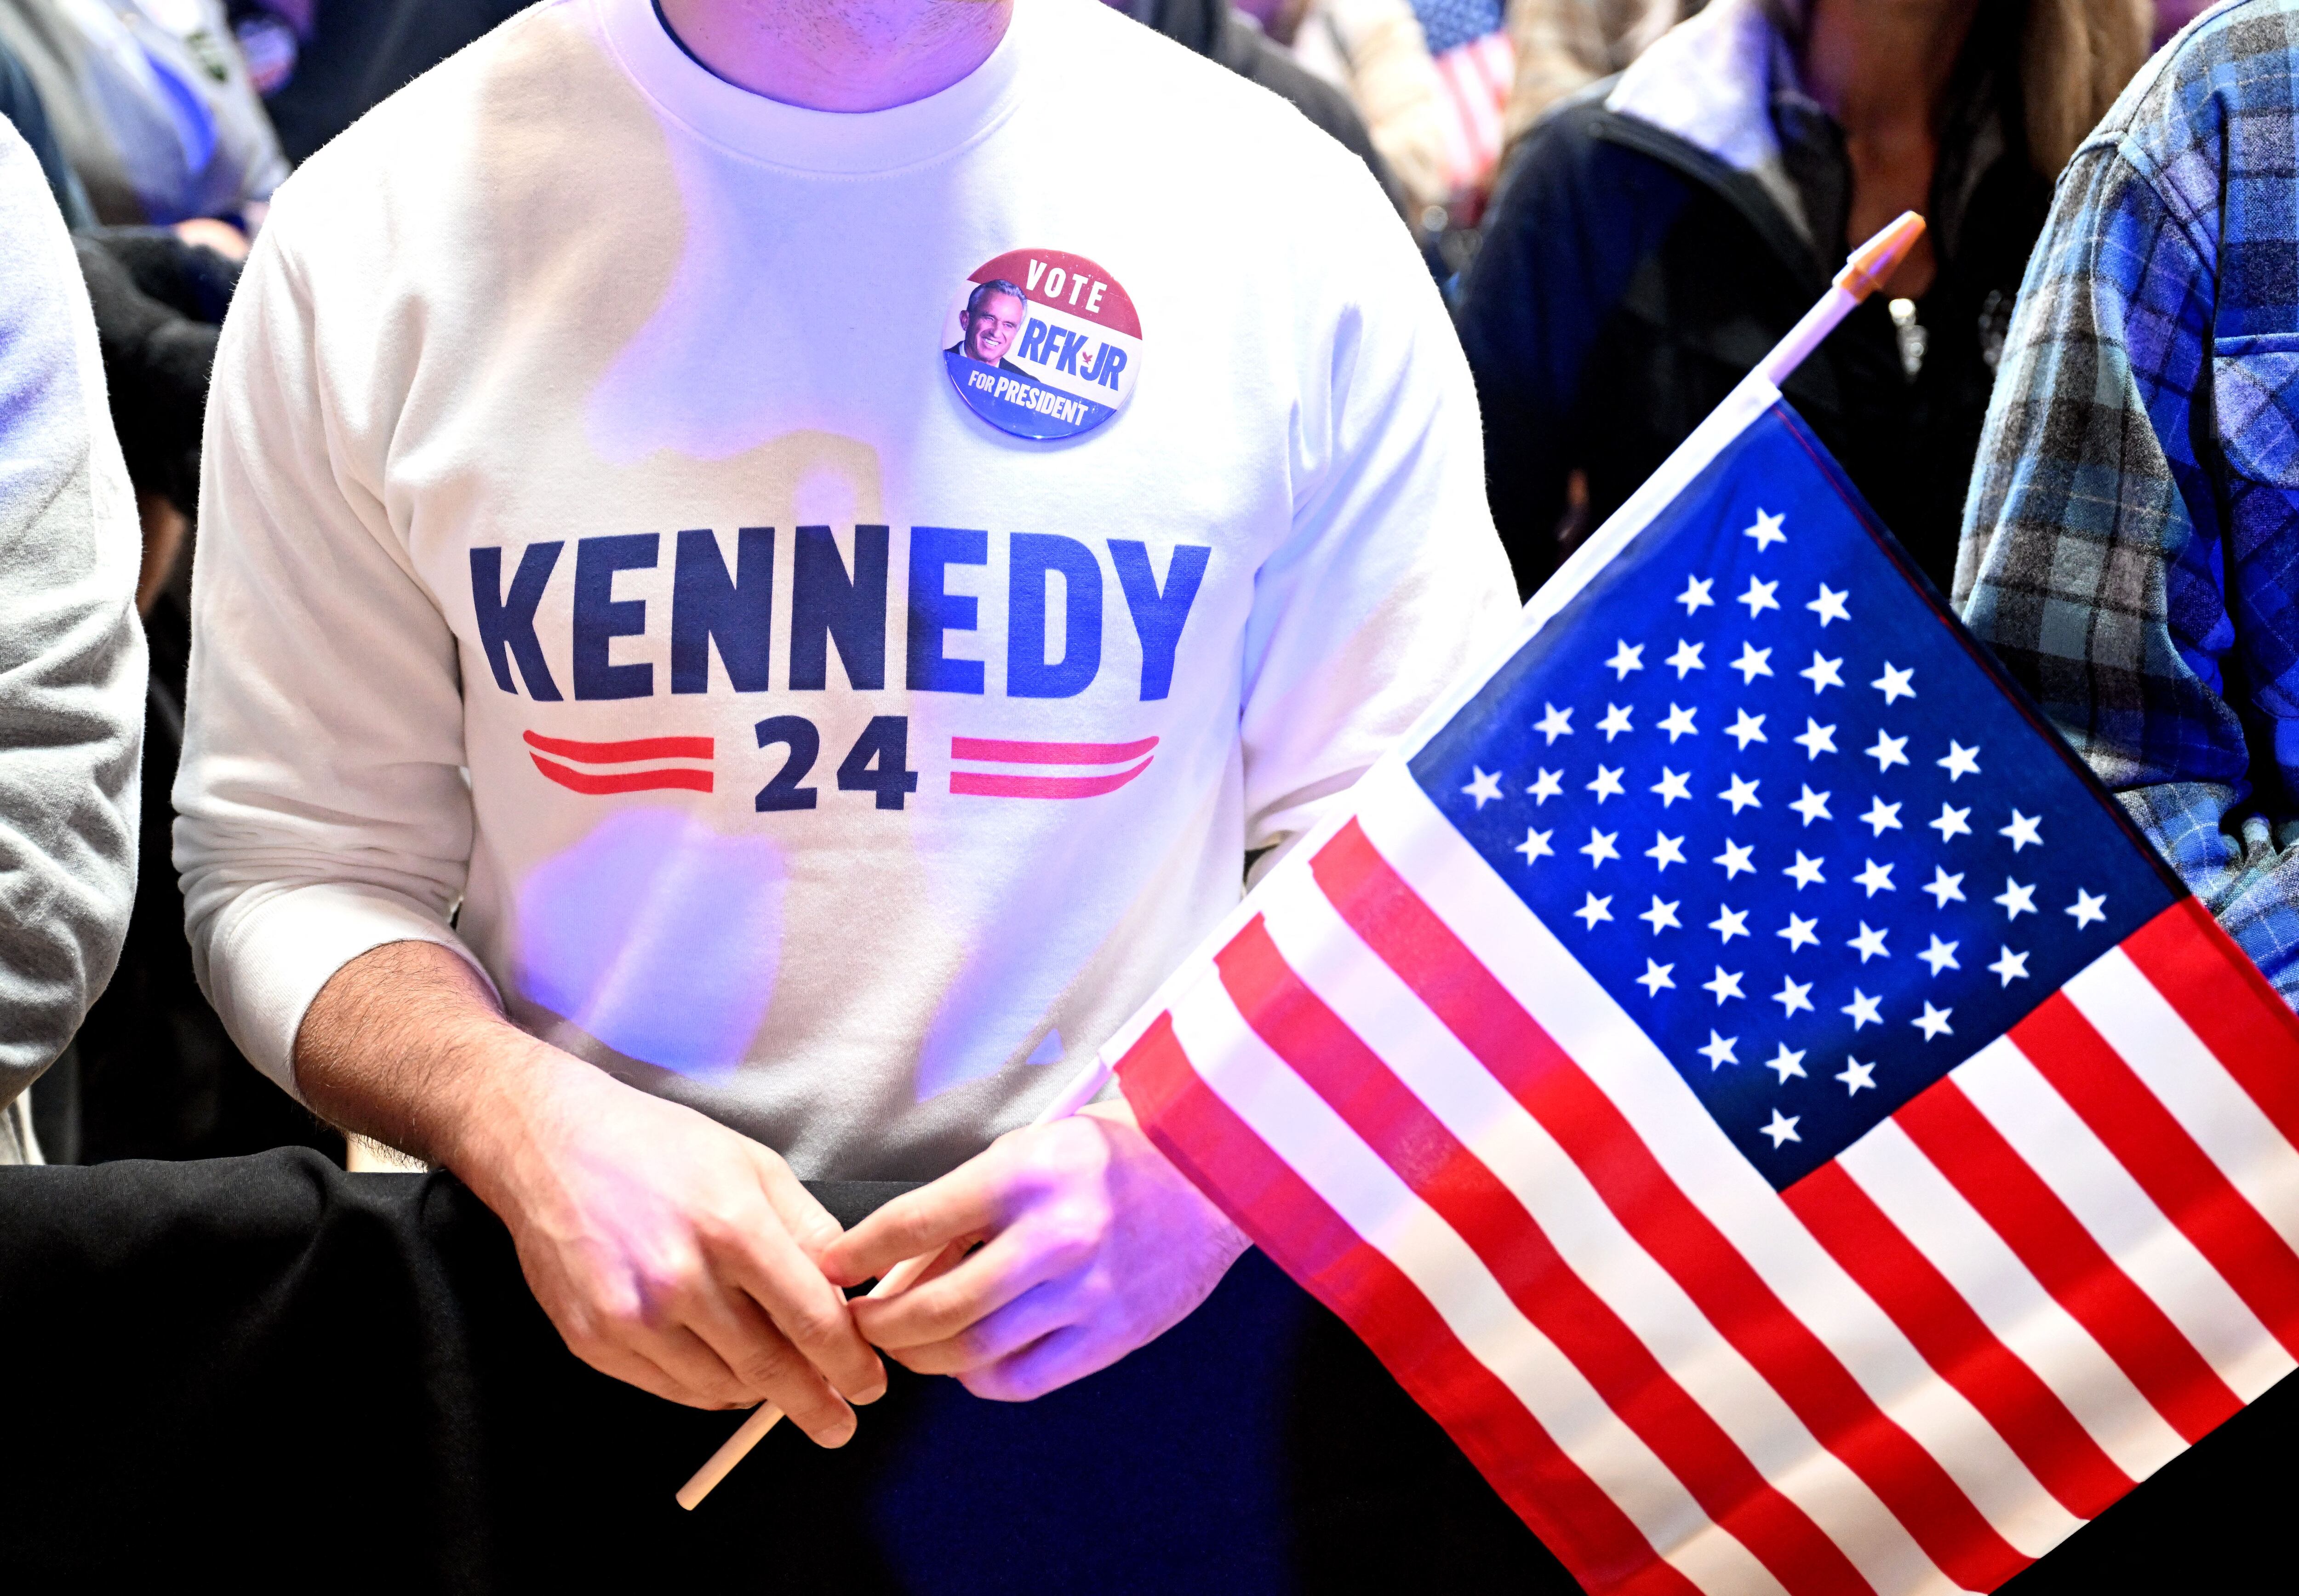 A supporter holds an American flag during a Robert F. Kennedy Jr. campaign event (Photo by JOSH EDELSON/AFP).